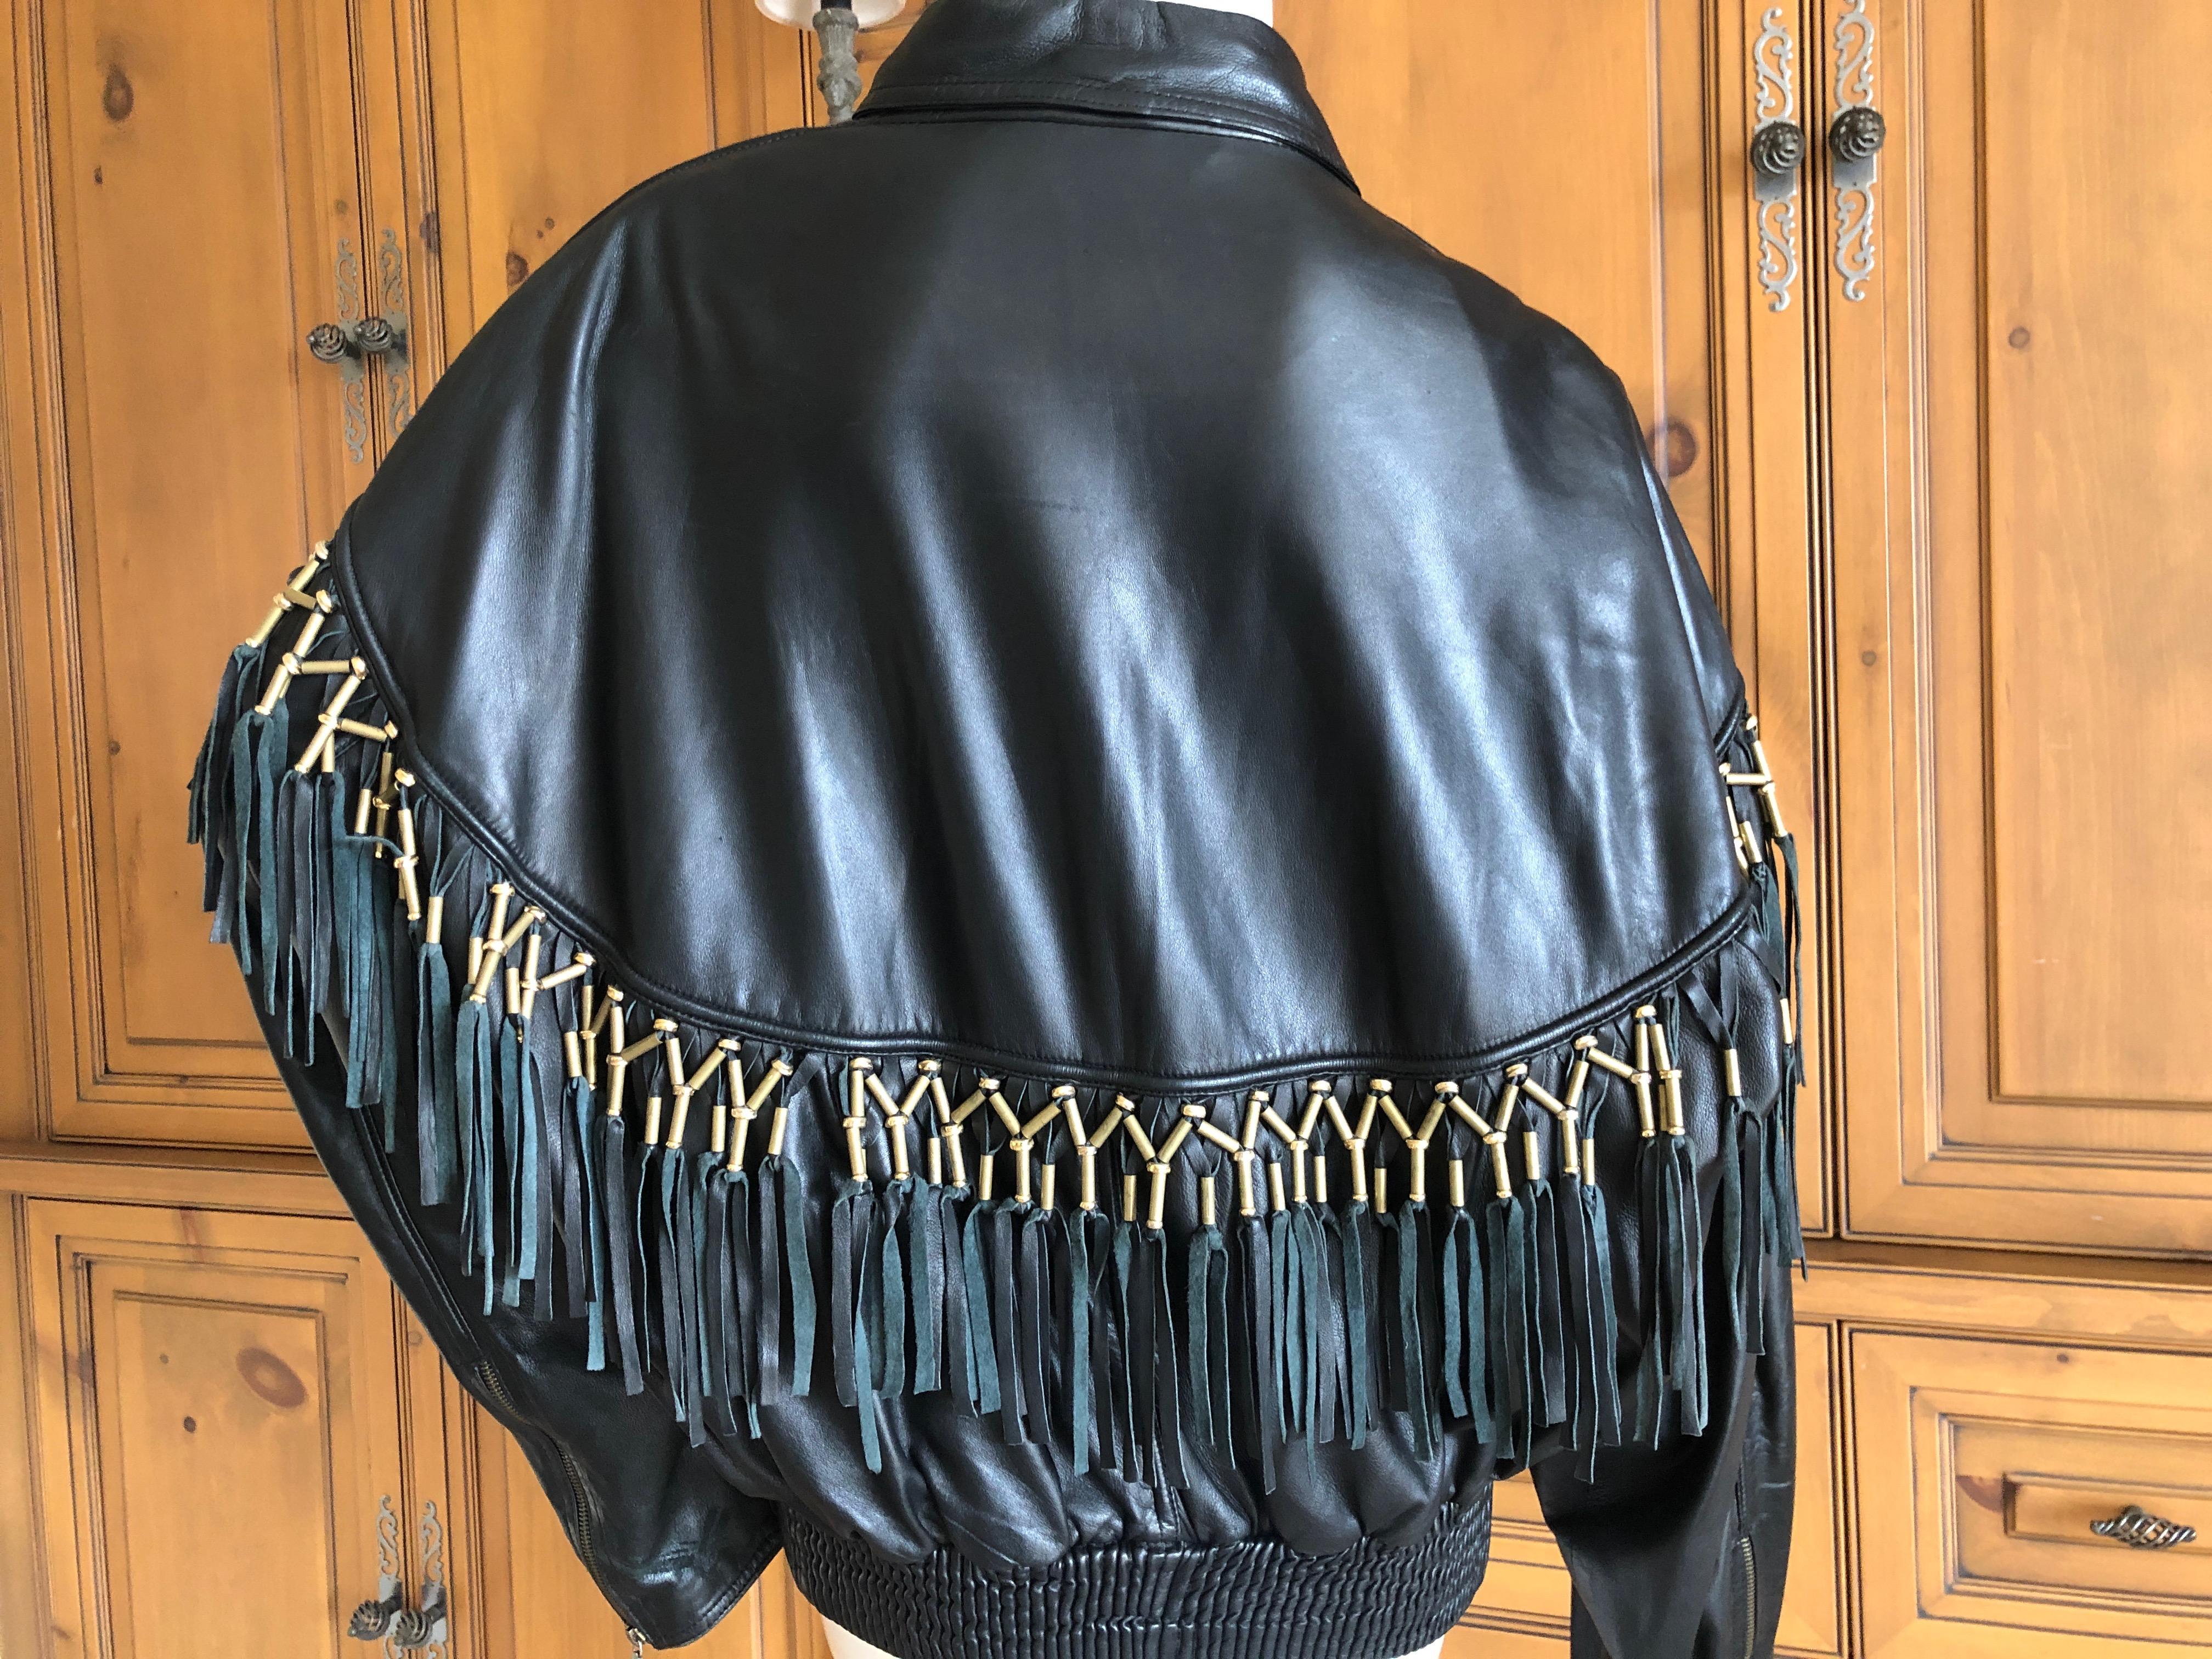 Black Gianni Versace 1984 Lambskin Leather Men's Jacket with Beaded Fringe For Sale